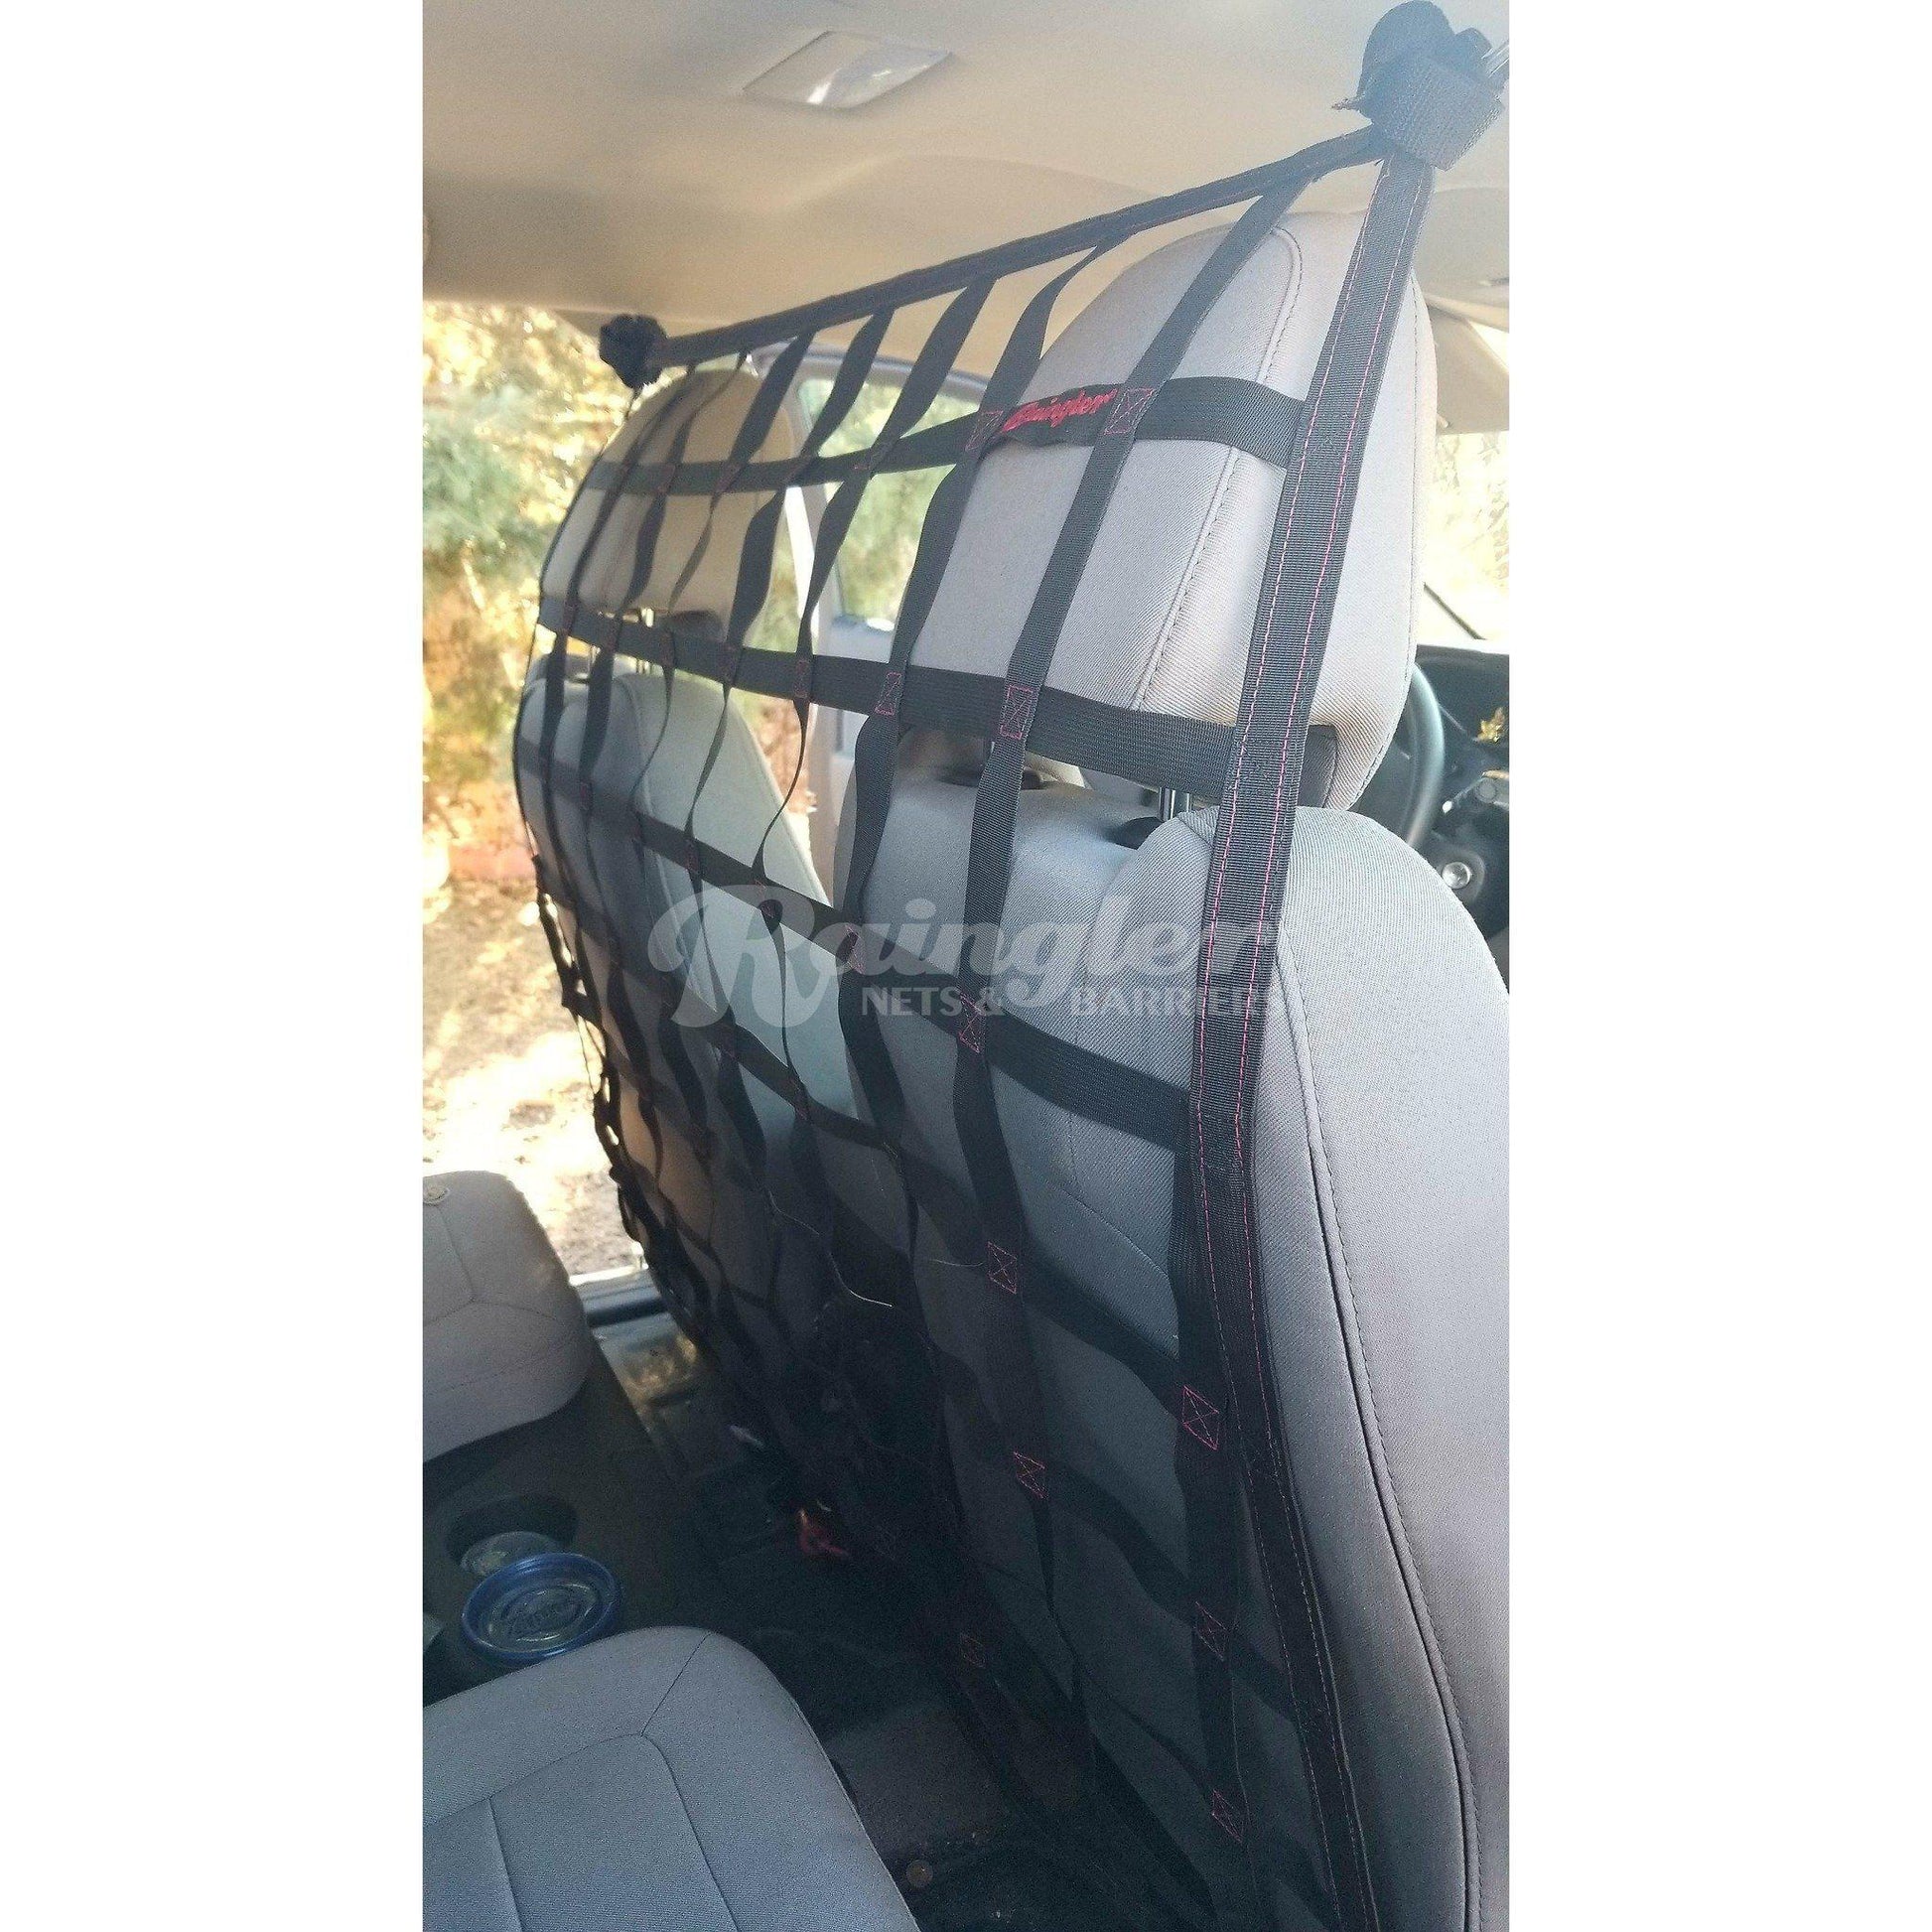 2015 - Newer Chevrolet Colorado Crew Cab Behind Front Seats Barrier Divider Net